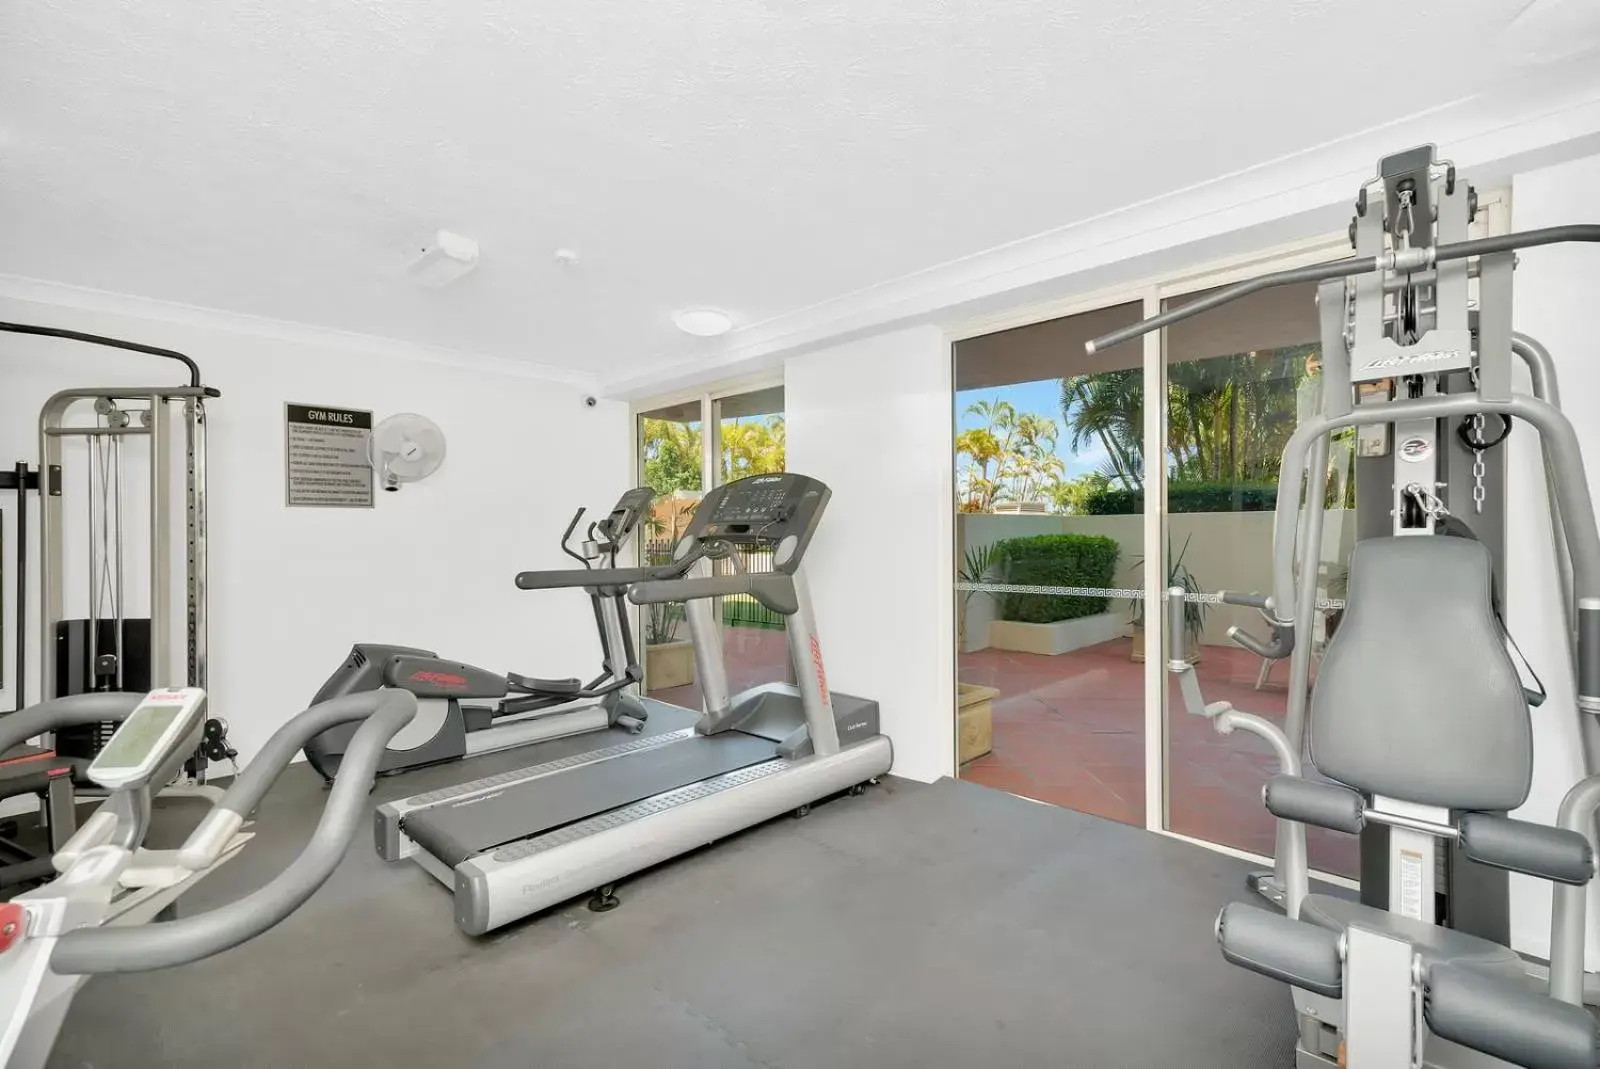 Fitness centre/facilities, Fitness Center/Facilities in Palazzo Colonnades